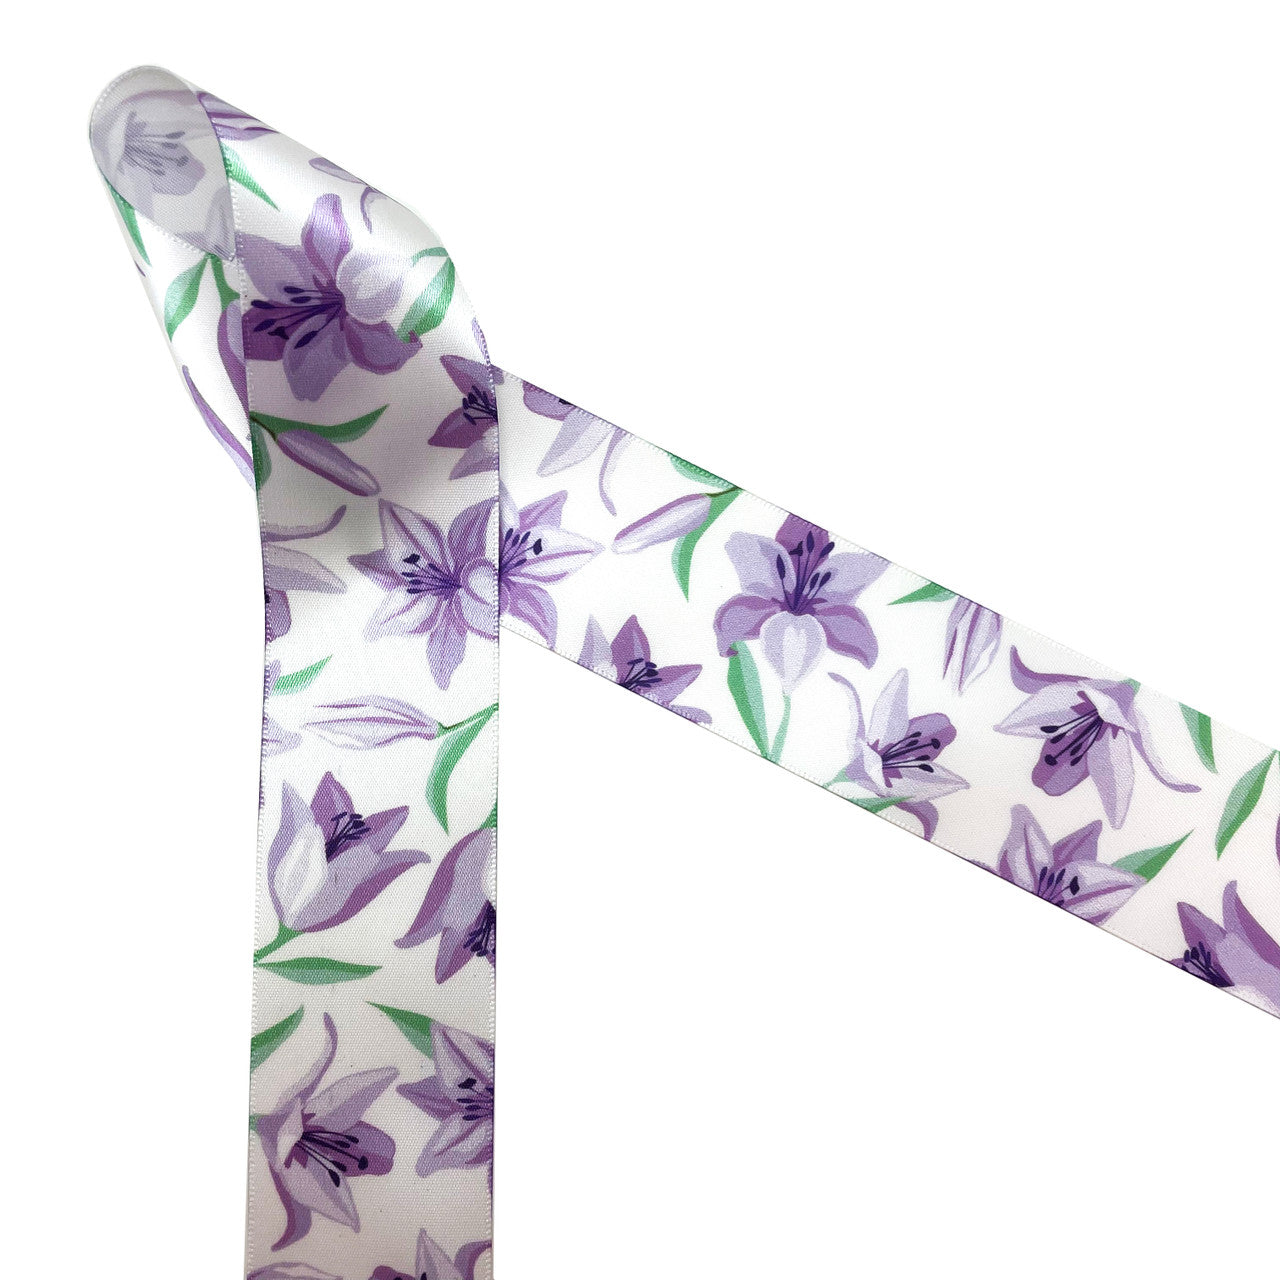 Lavender Lillies with green leaves and stems printed on 1.5" white single face satin is the ideal ribbon for Spring, Easter and Mother's day. Florals are trending making this a perfect ribbon for bridal showers and wedding decor too. This is a great ribbon for gift wrap, gift baskets, table decor, quilting, sewing and wreath making projects too. All our ribbon is designed and printed in the USA